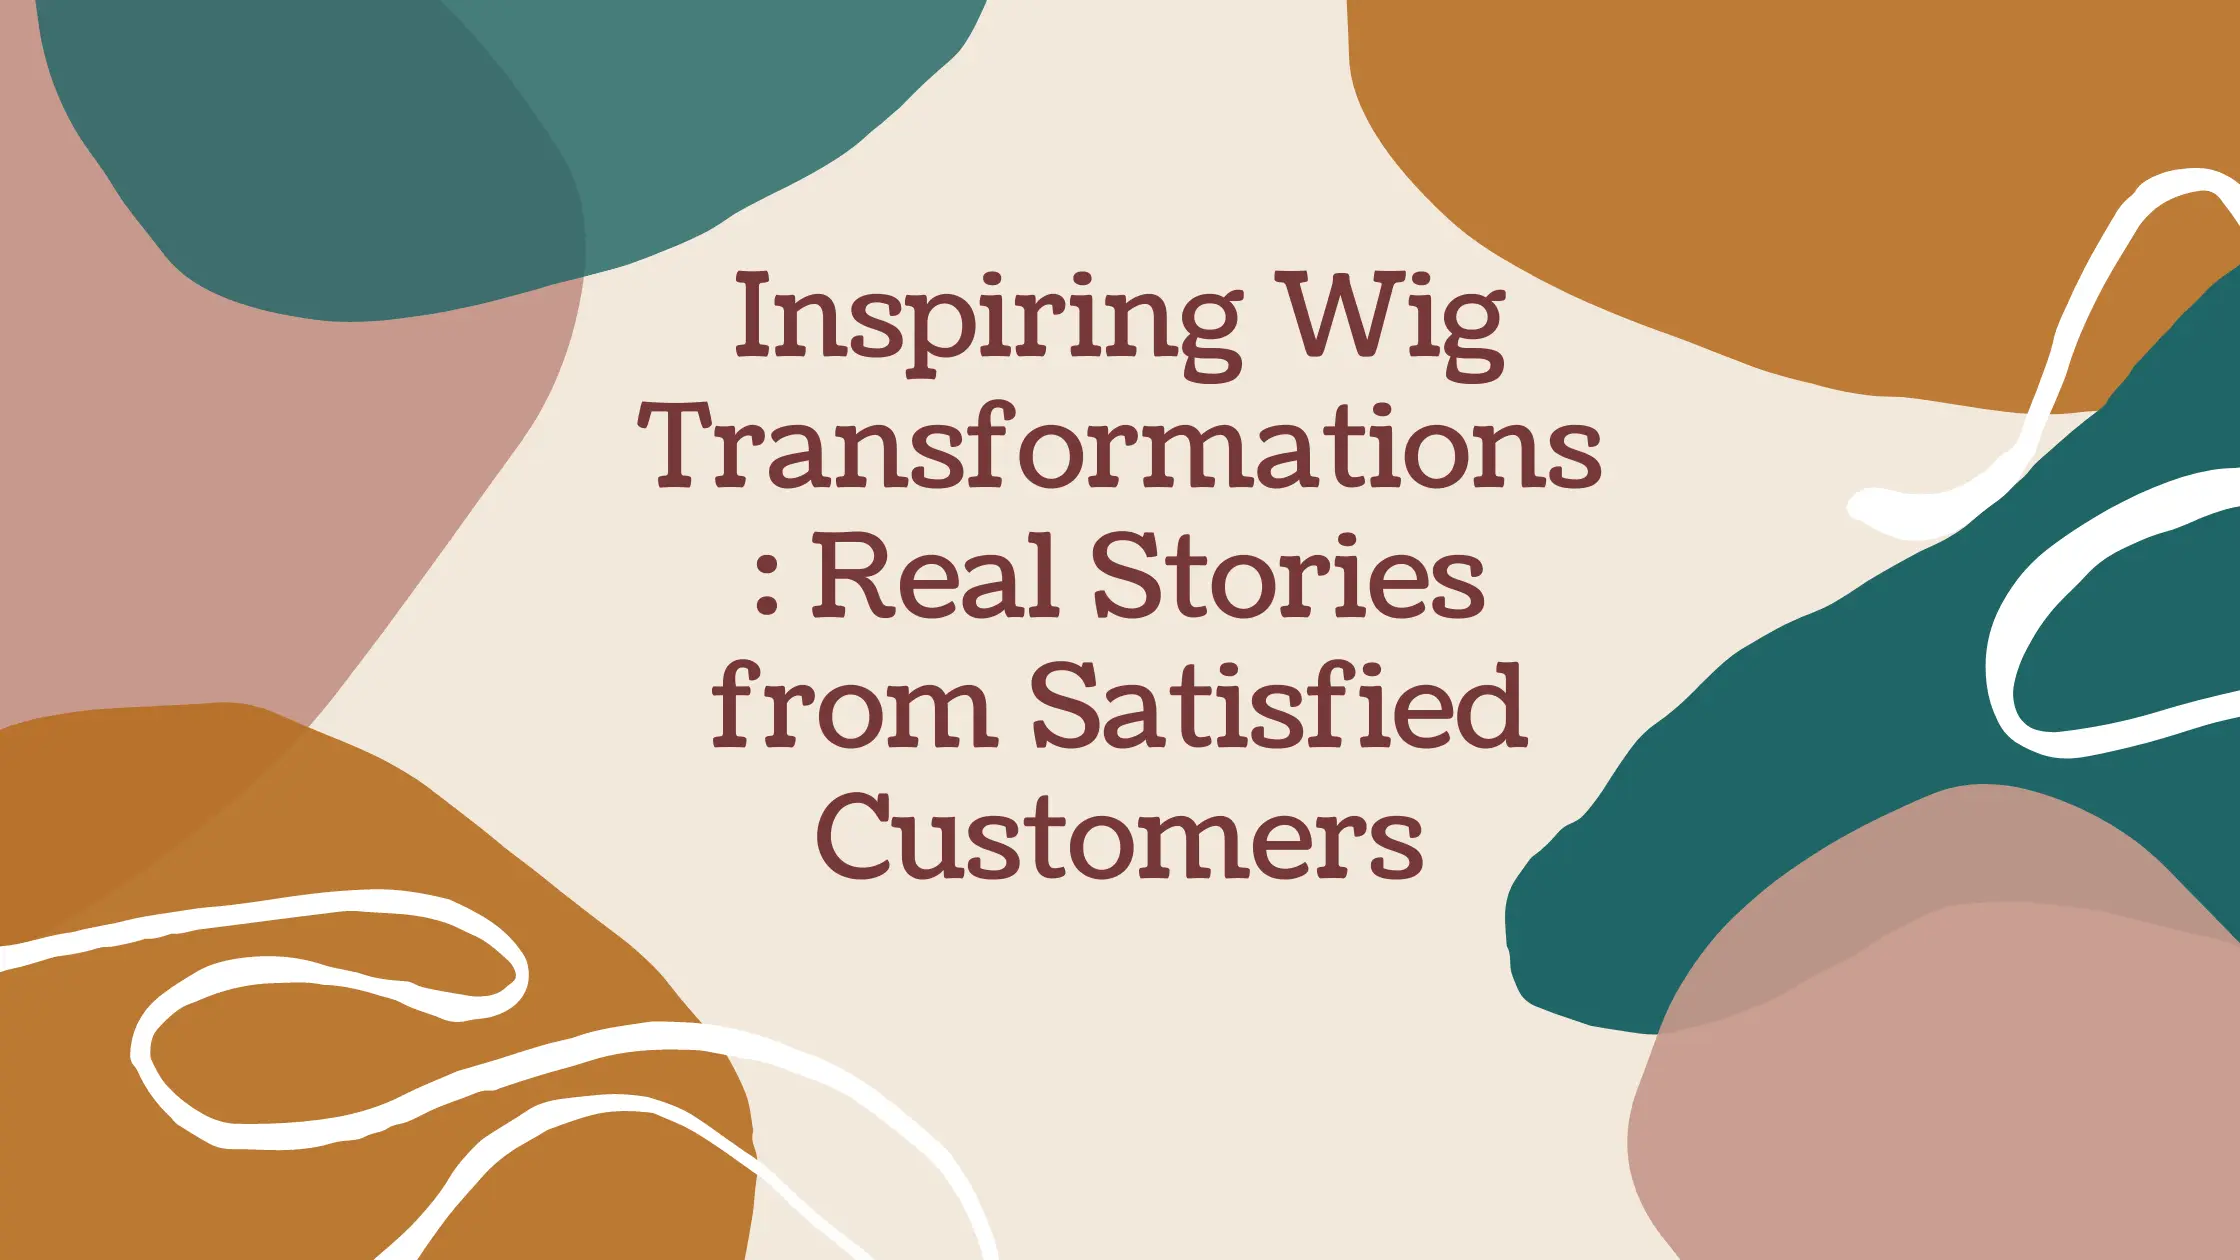 Inspiring Wig Transformations: Real Stories from Satisfied Customers